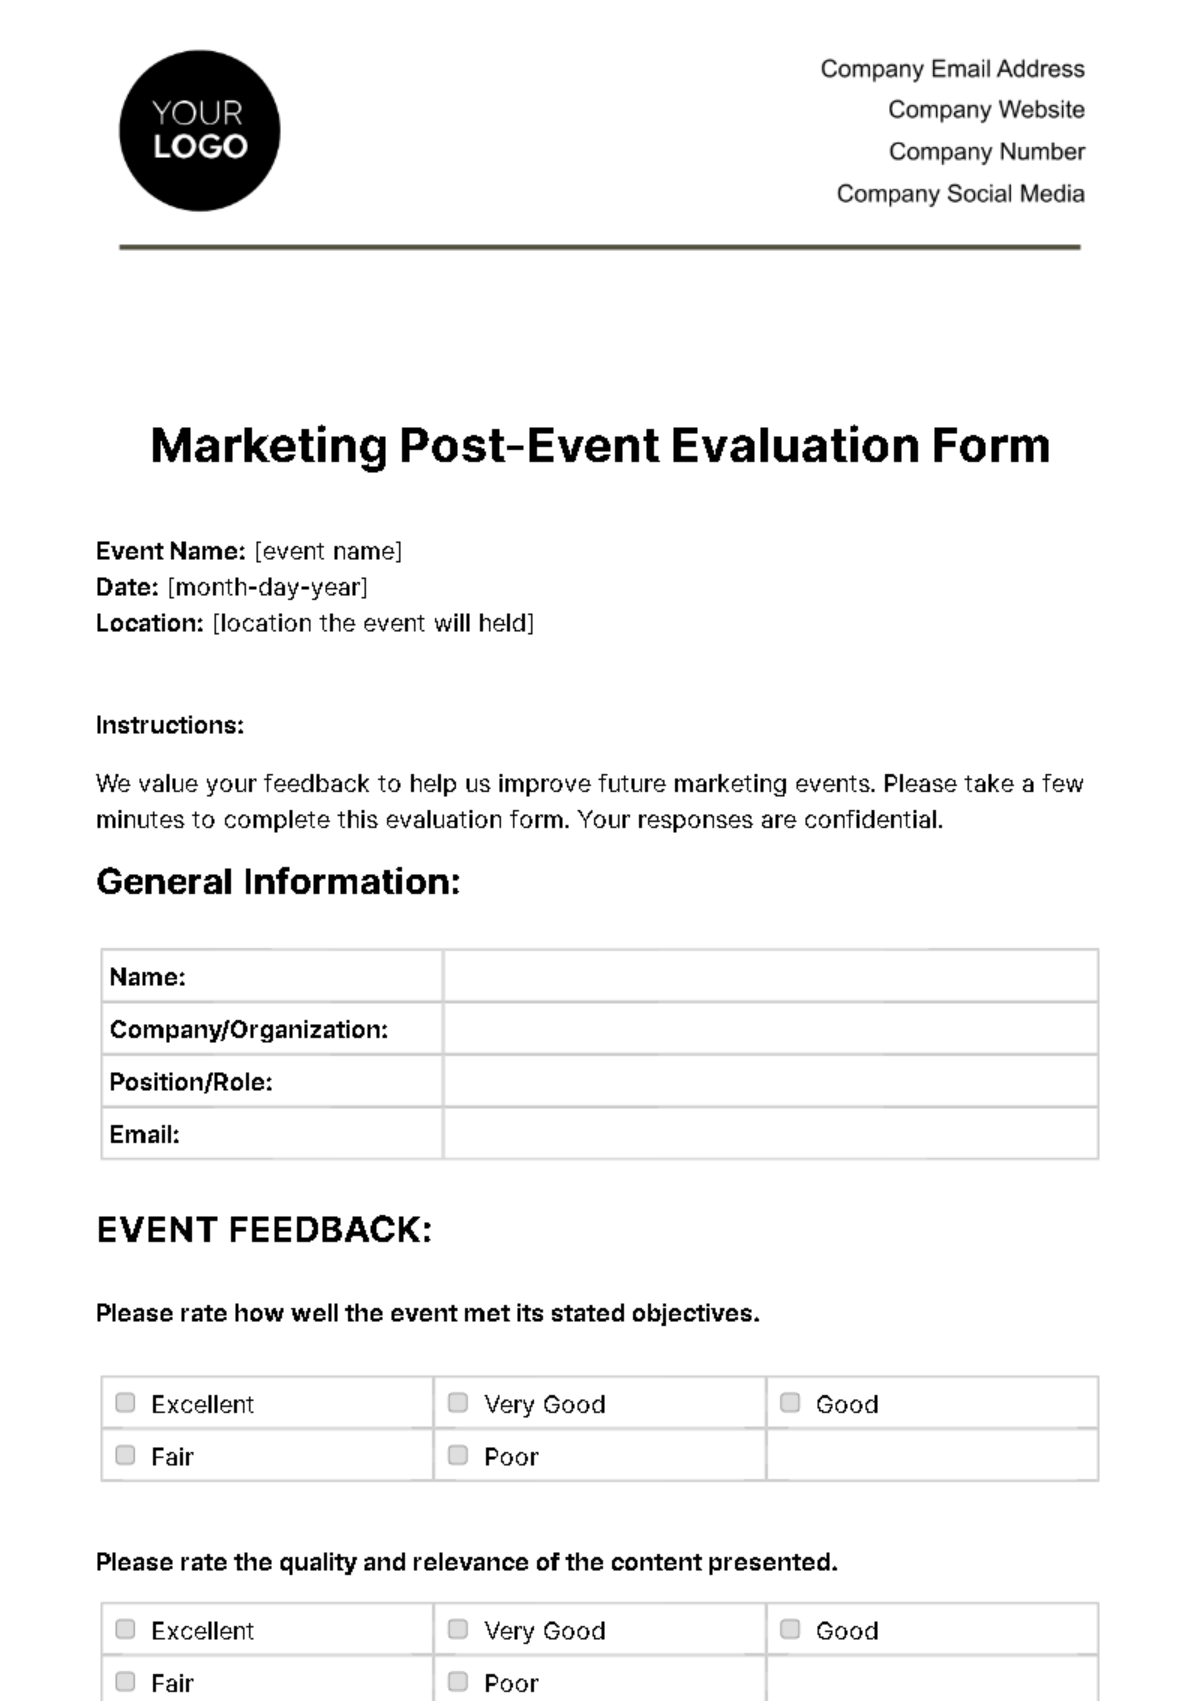 Marketing Post-Event Evaluation Form Template